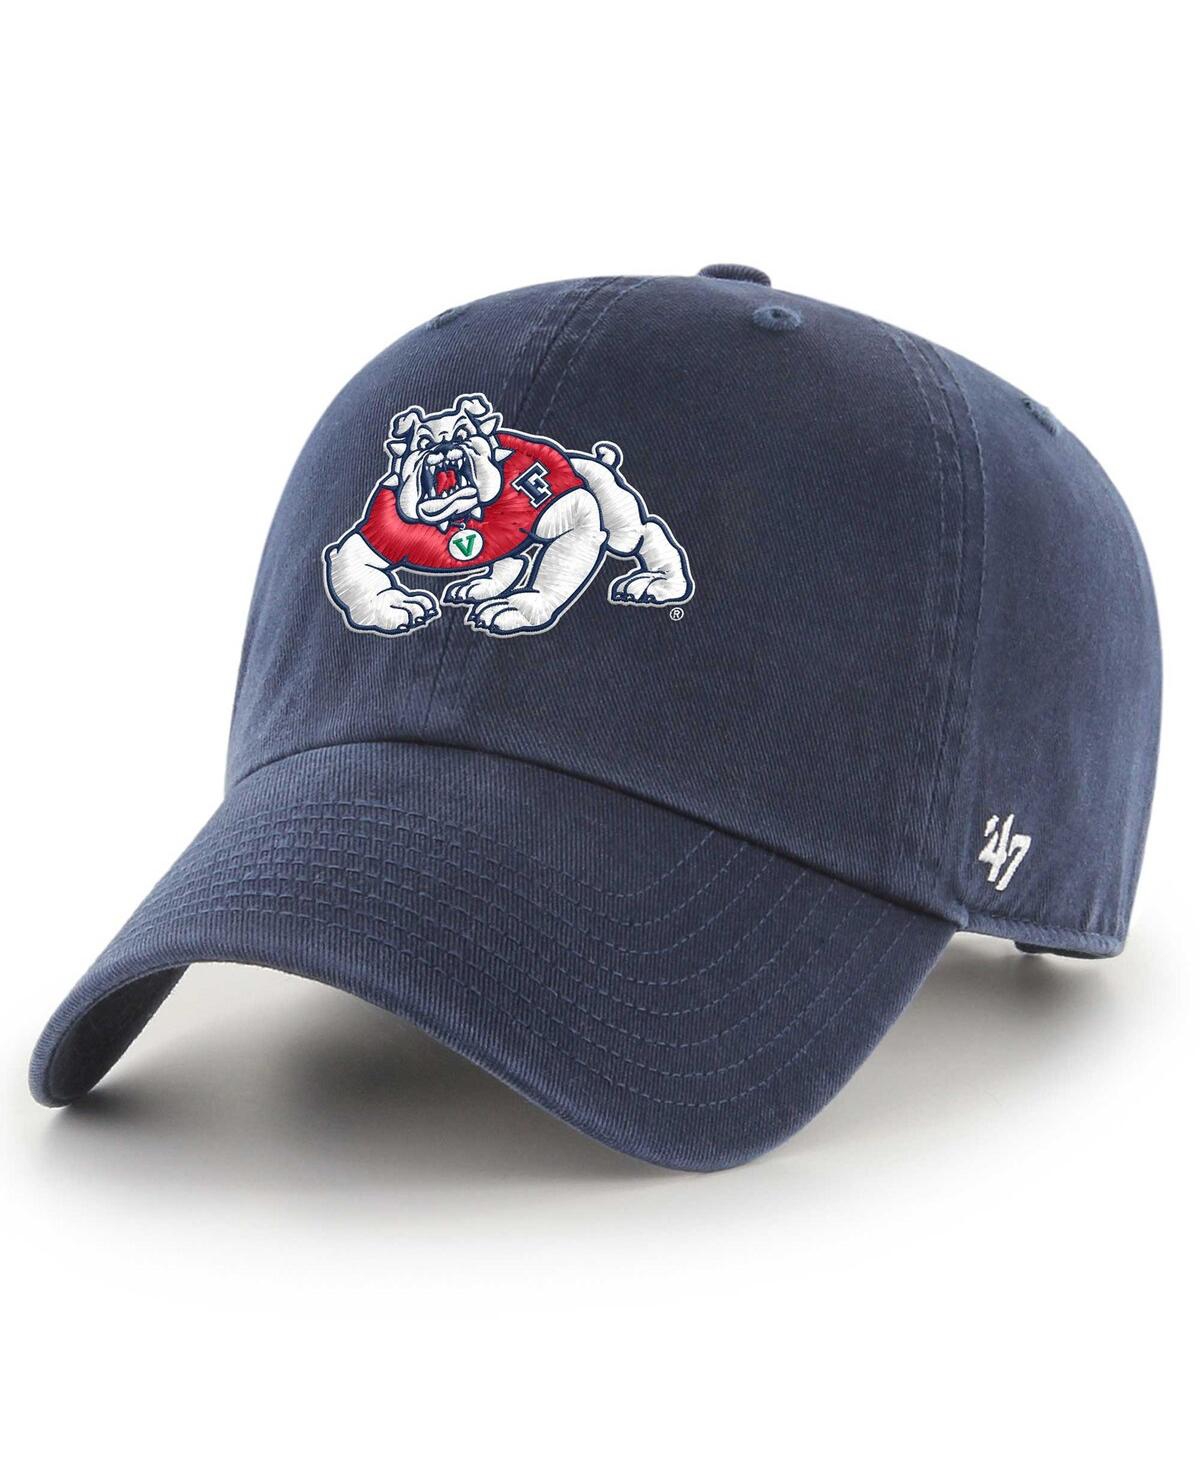 47 Men's Navy Fresno State Bulldogs Clean Up Adjustable Hat - Navy Red